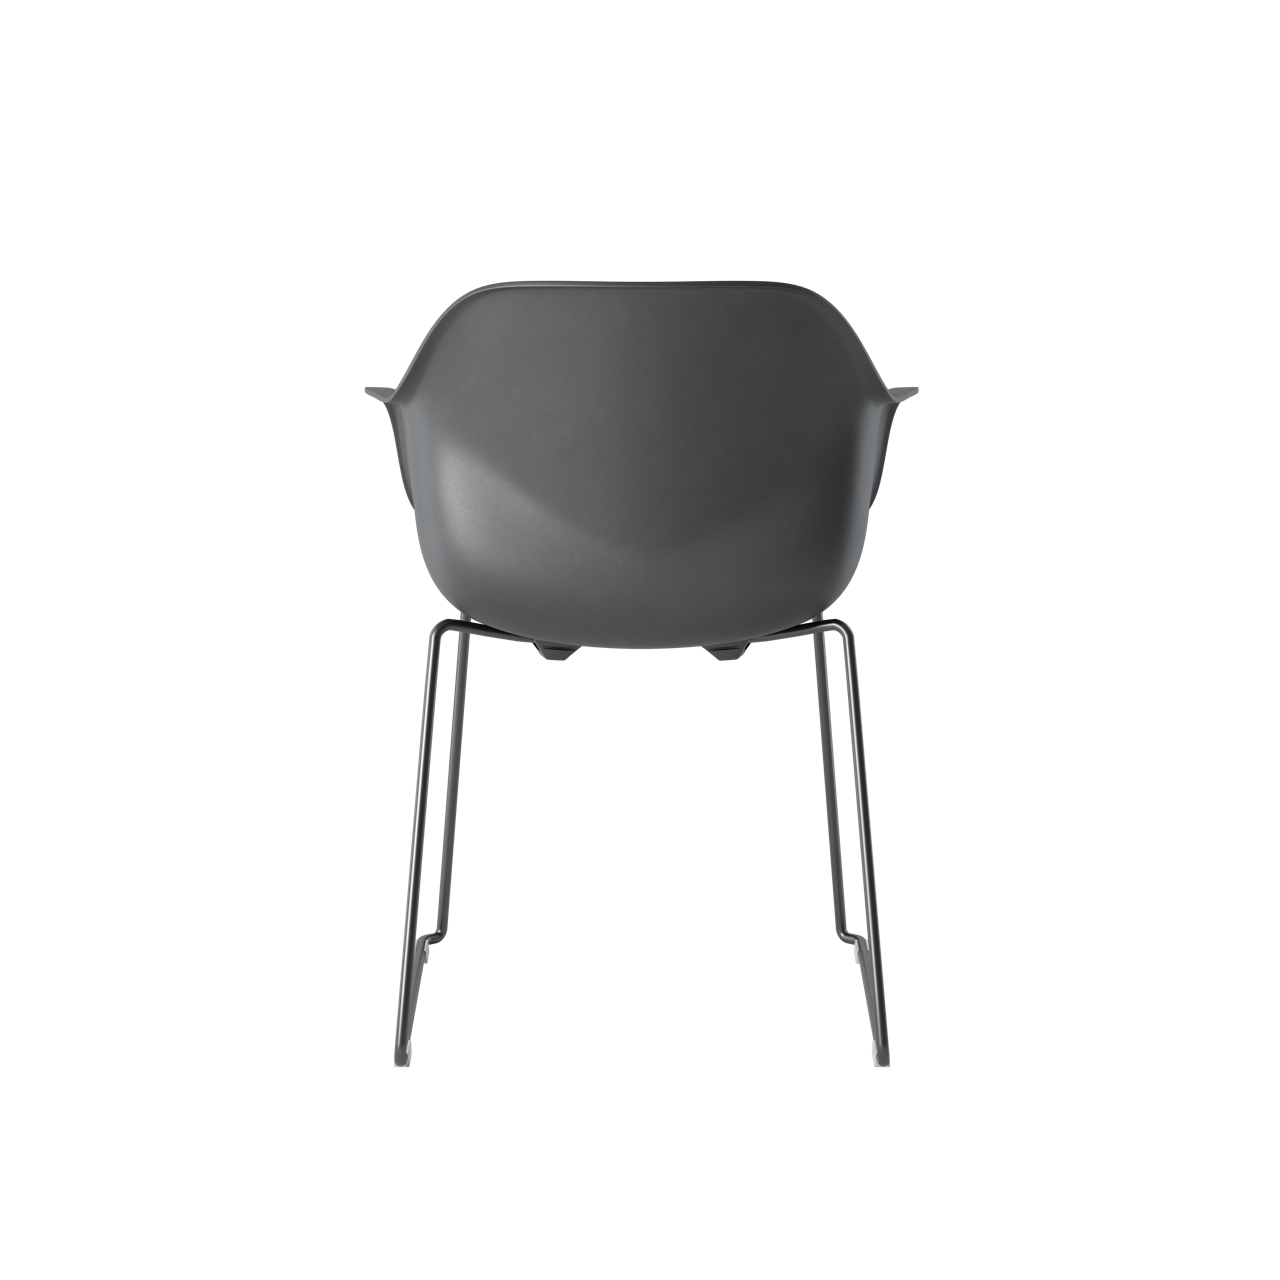 OCEE&FOUR – Chairs – FourMe 88 – Plastic shell - Skid Frame - Packshot Image 3 Large